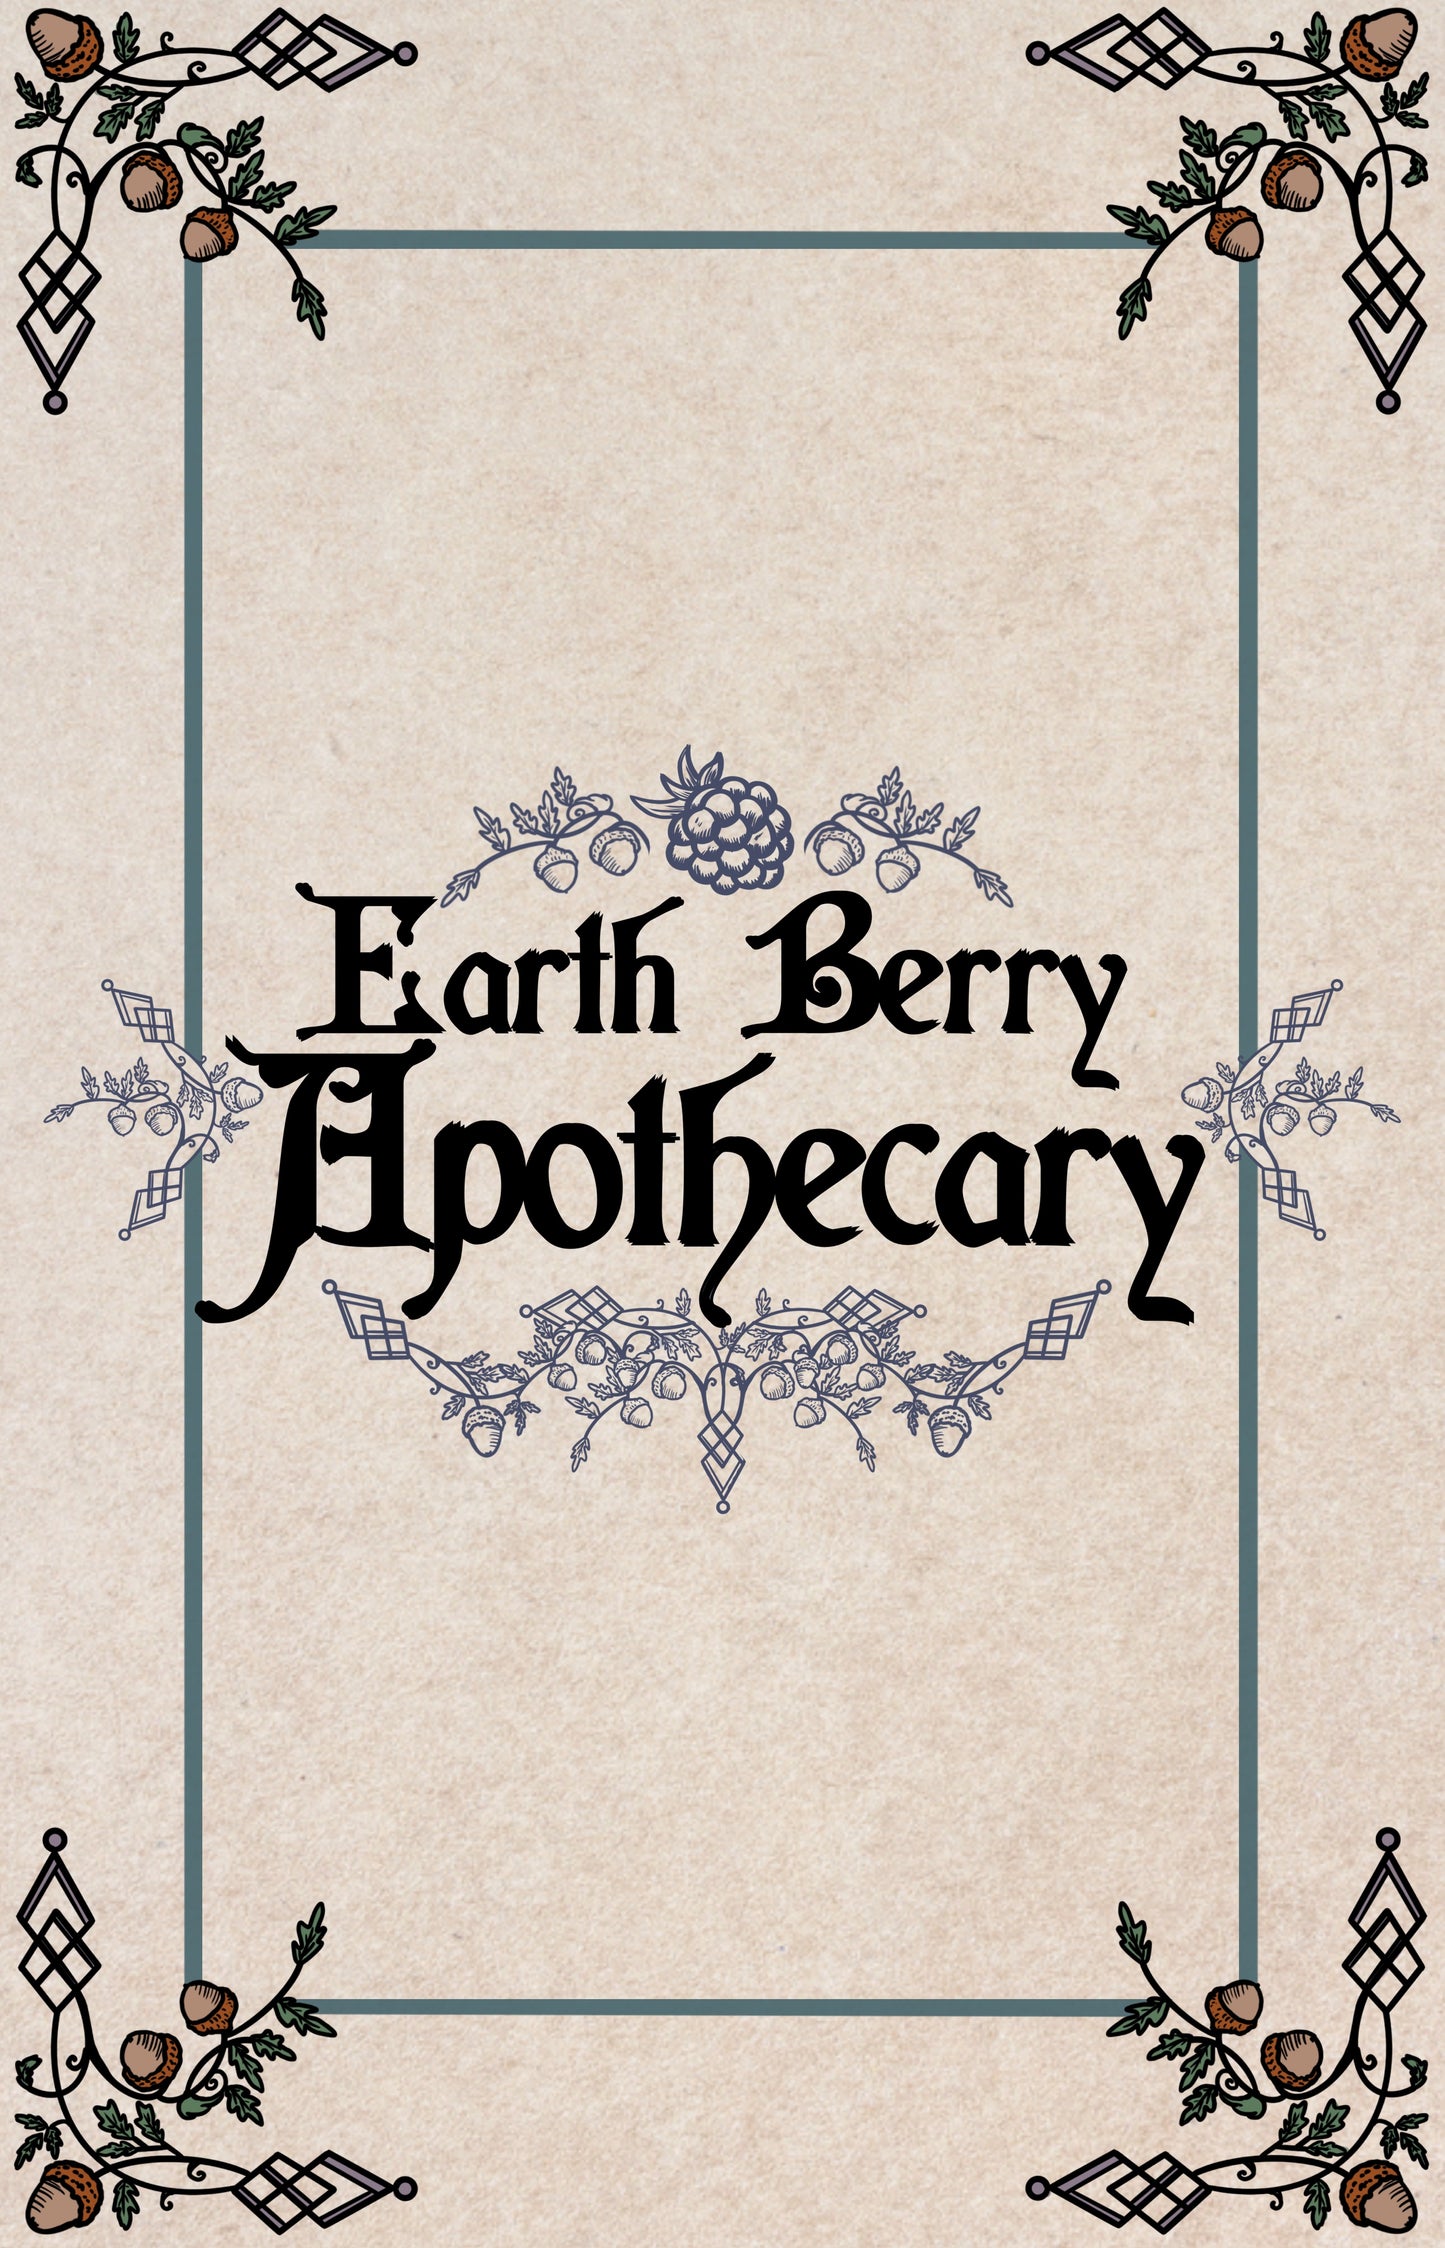 Earth berry apothecary fantasy themed playing cards